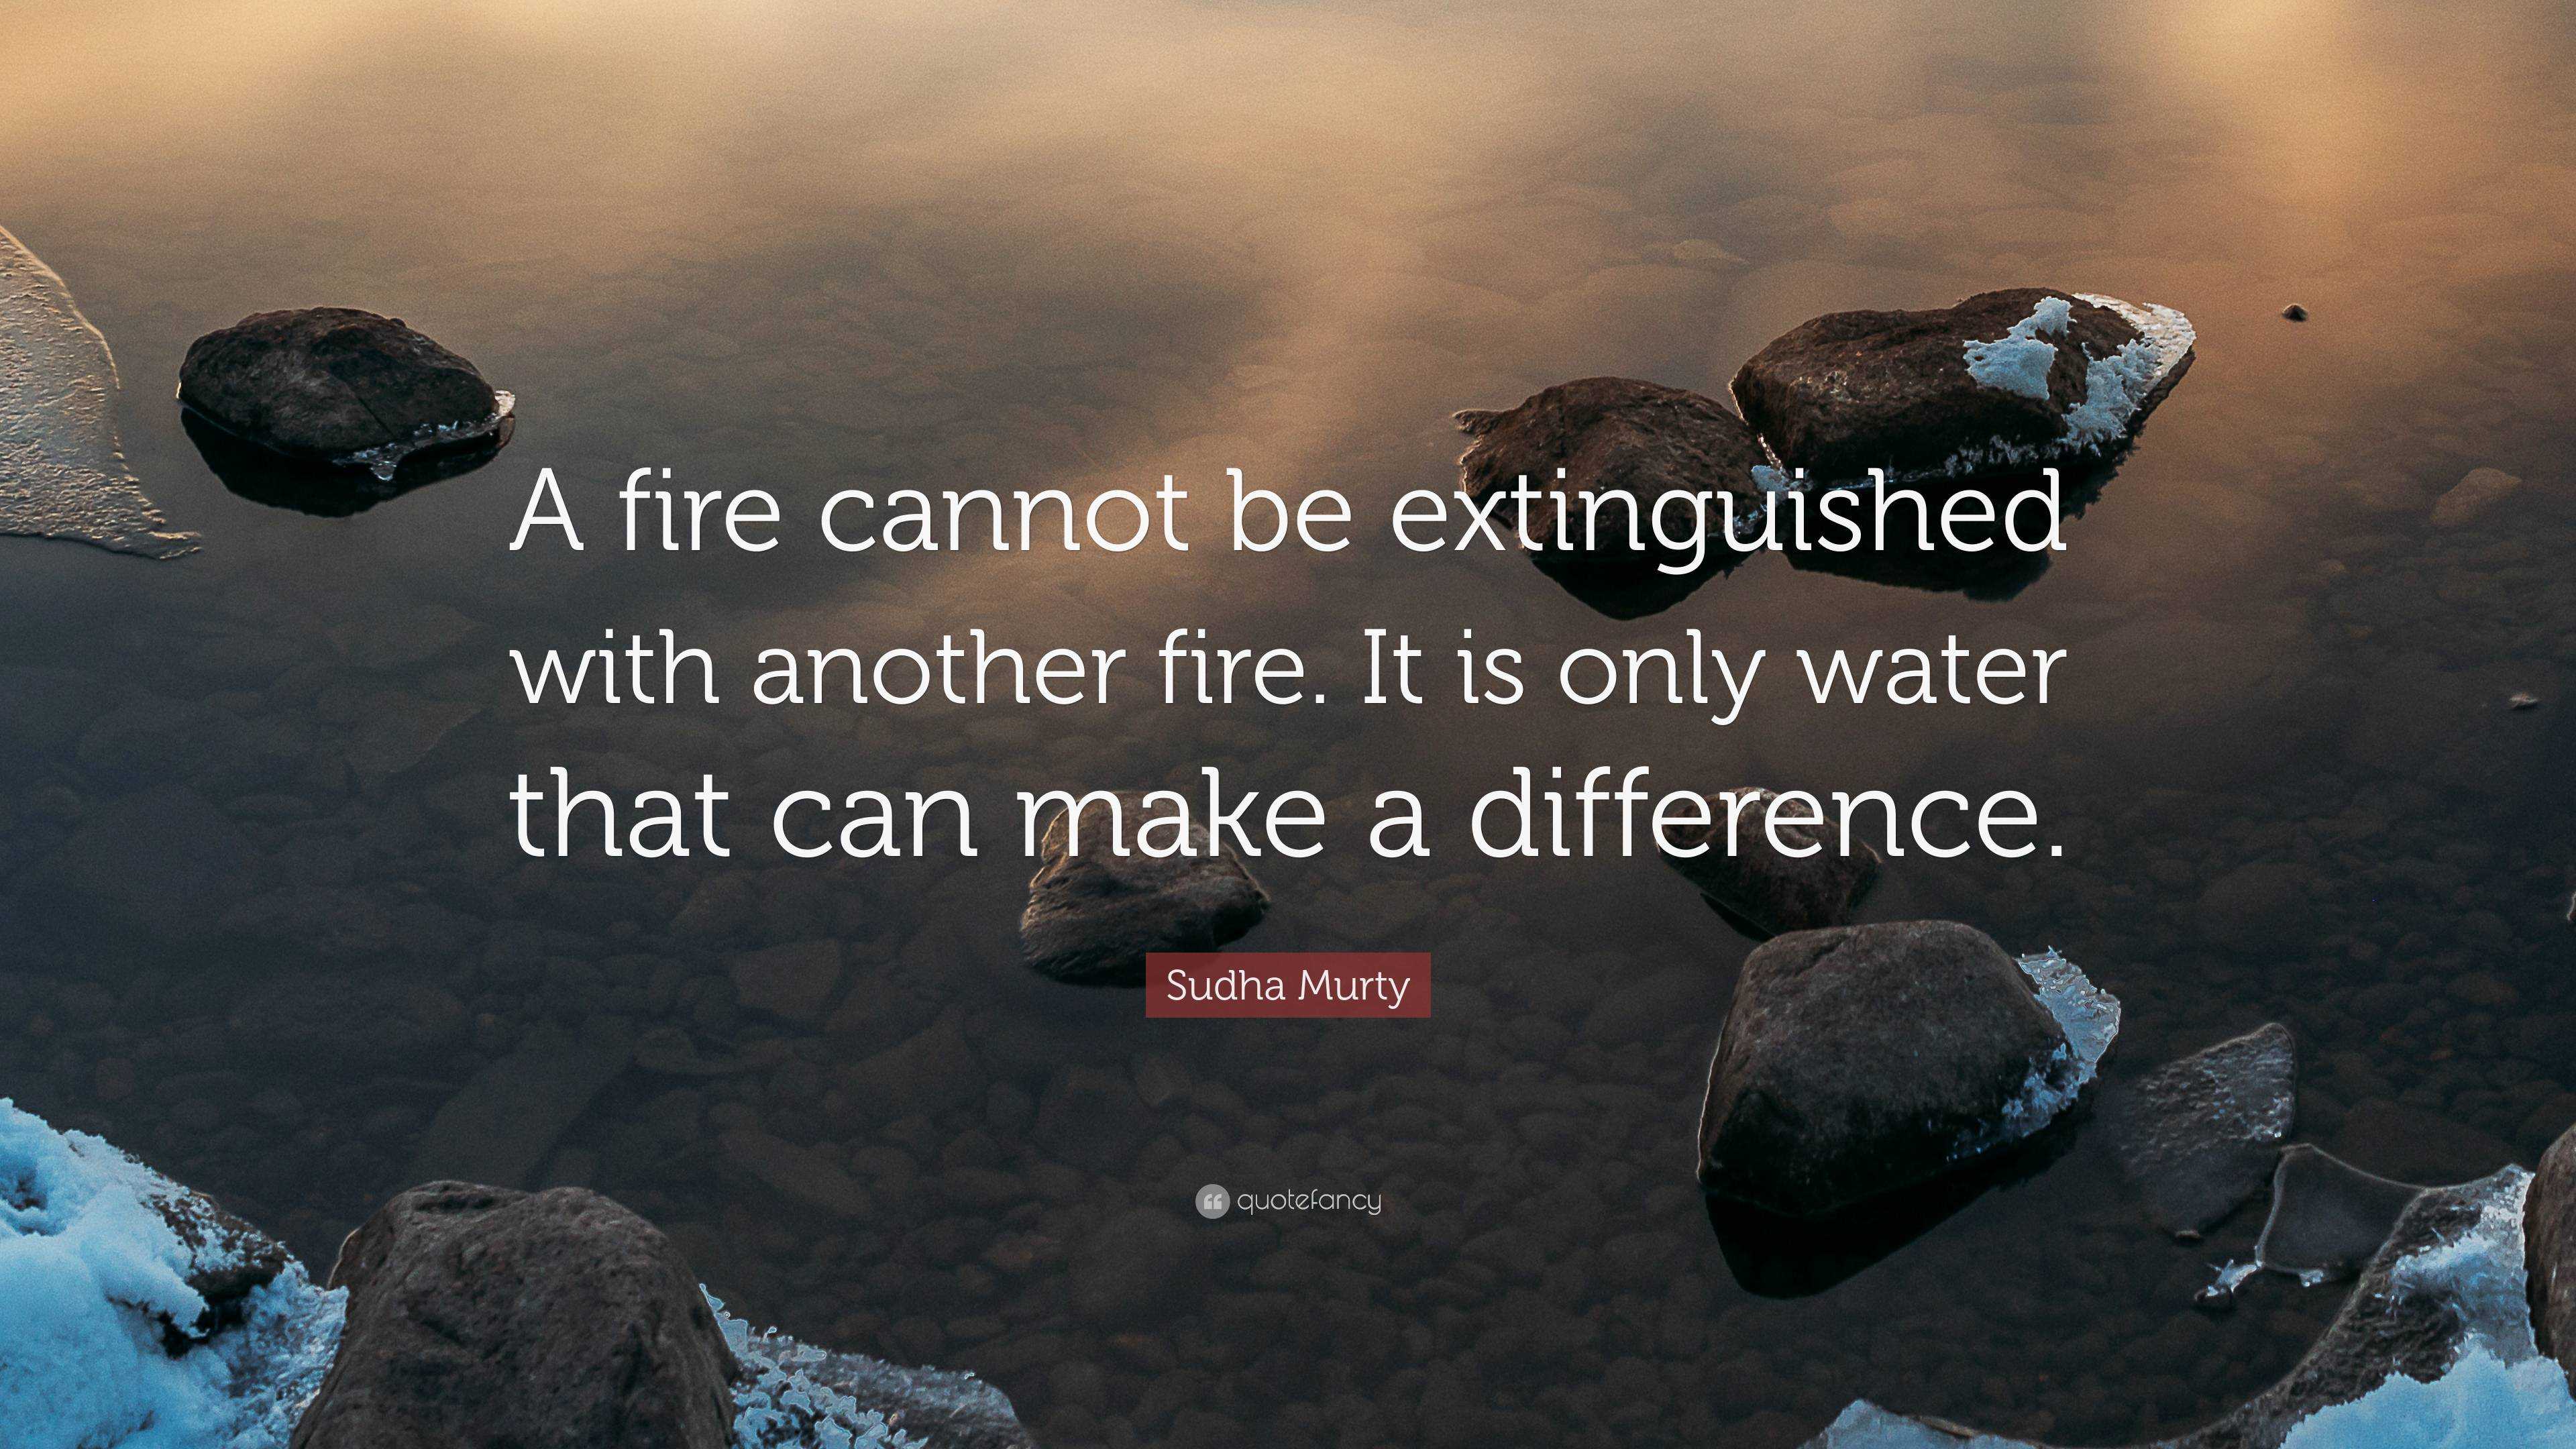 Sudha Murty Quote: “A fire cannot be extinguished with another fire. It ...